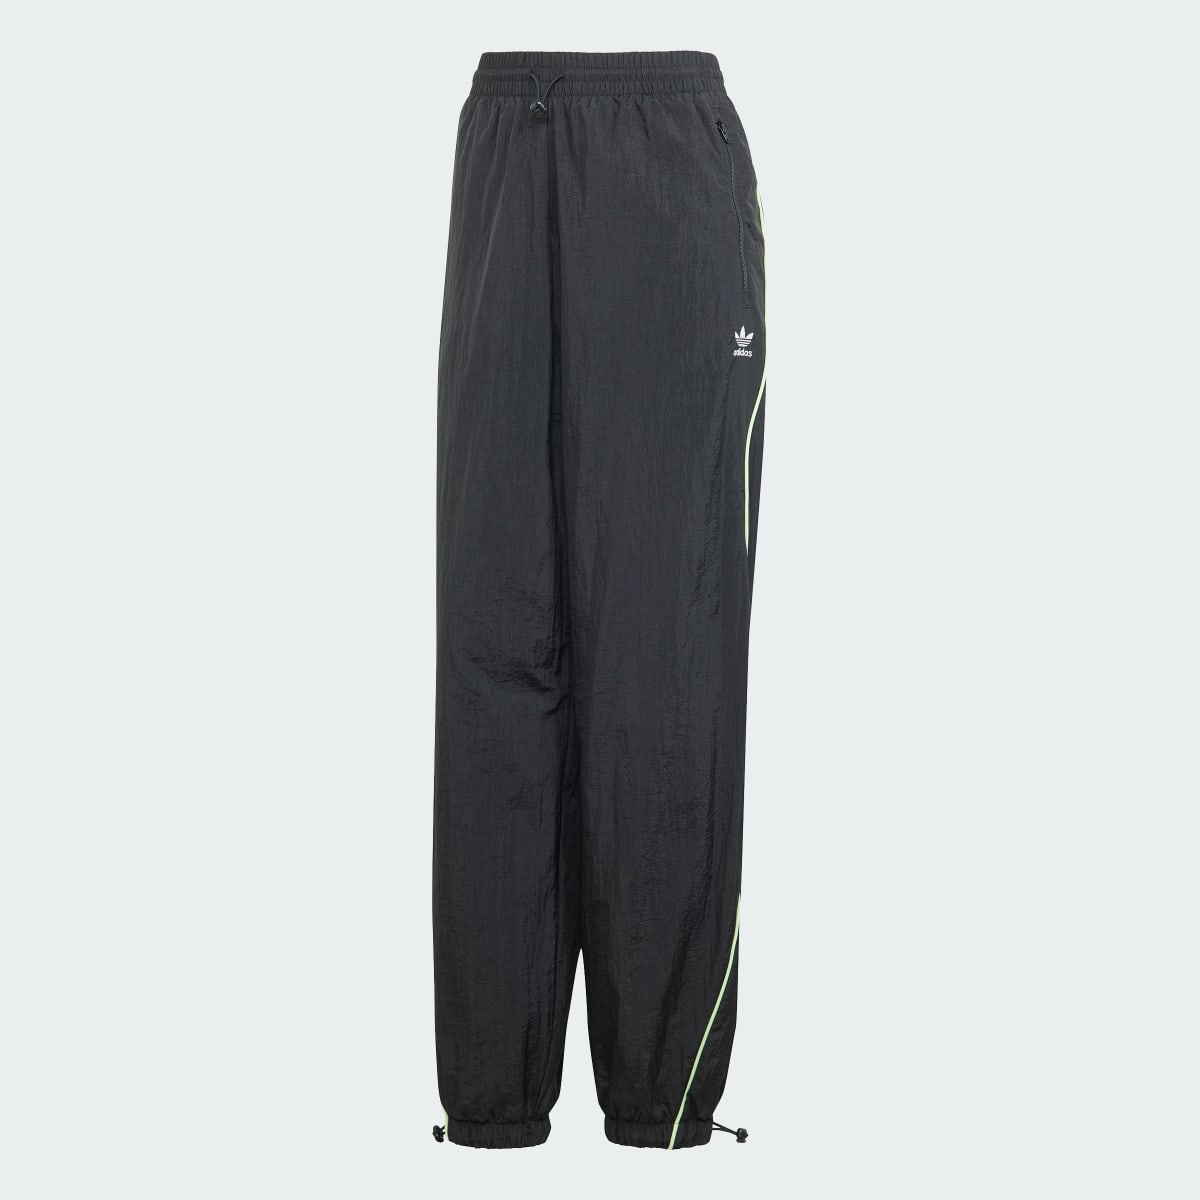 Adidas Loose Parachute Trousers. 4